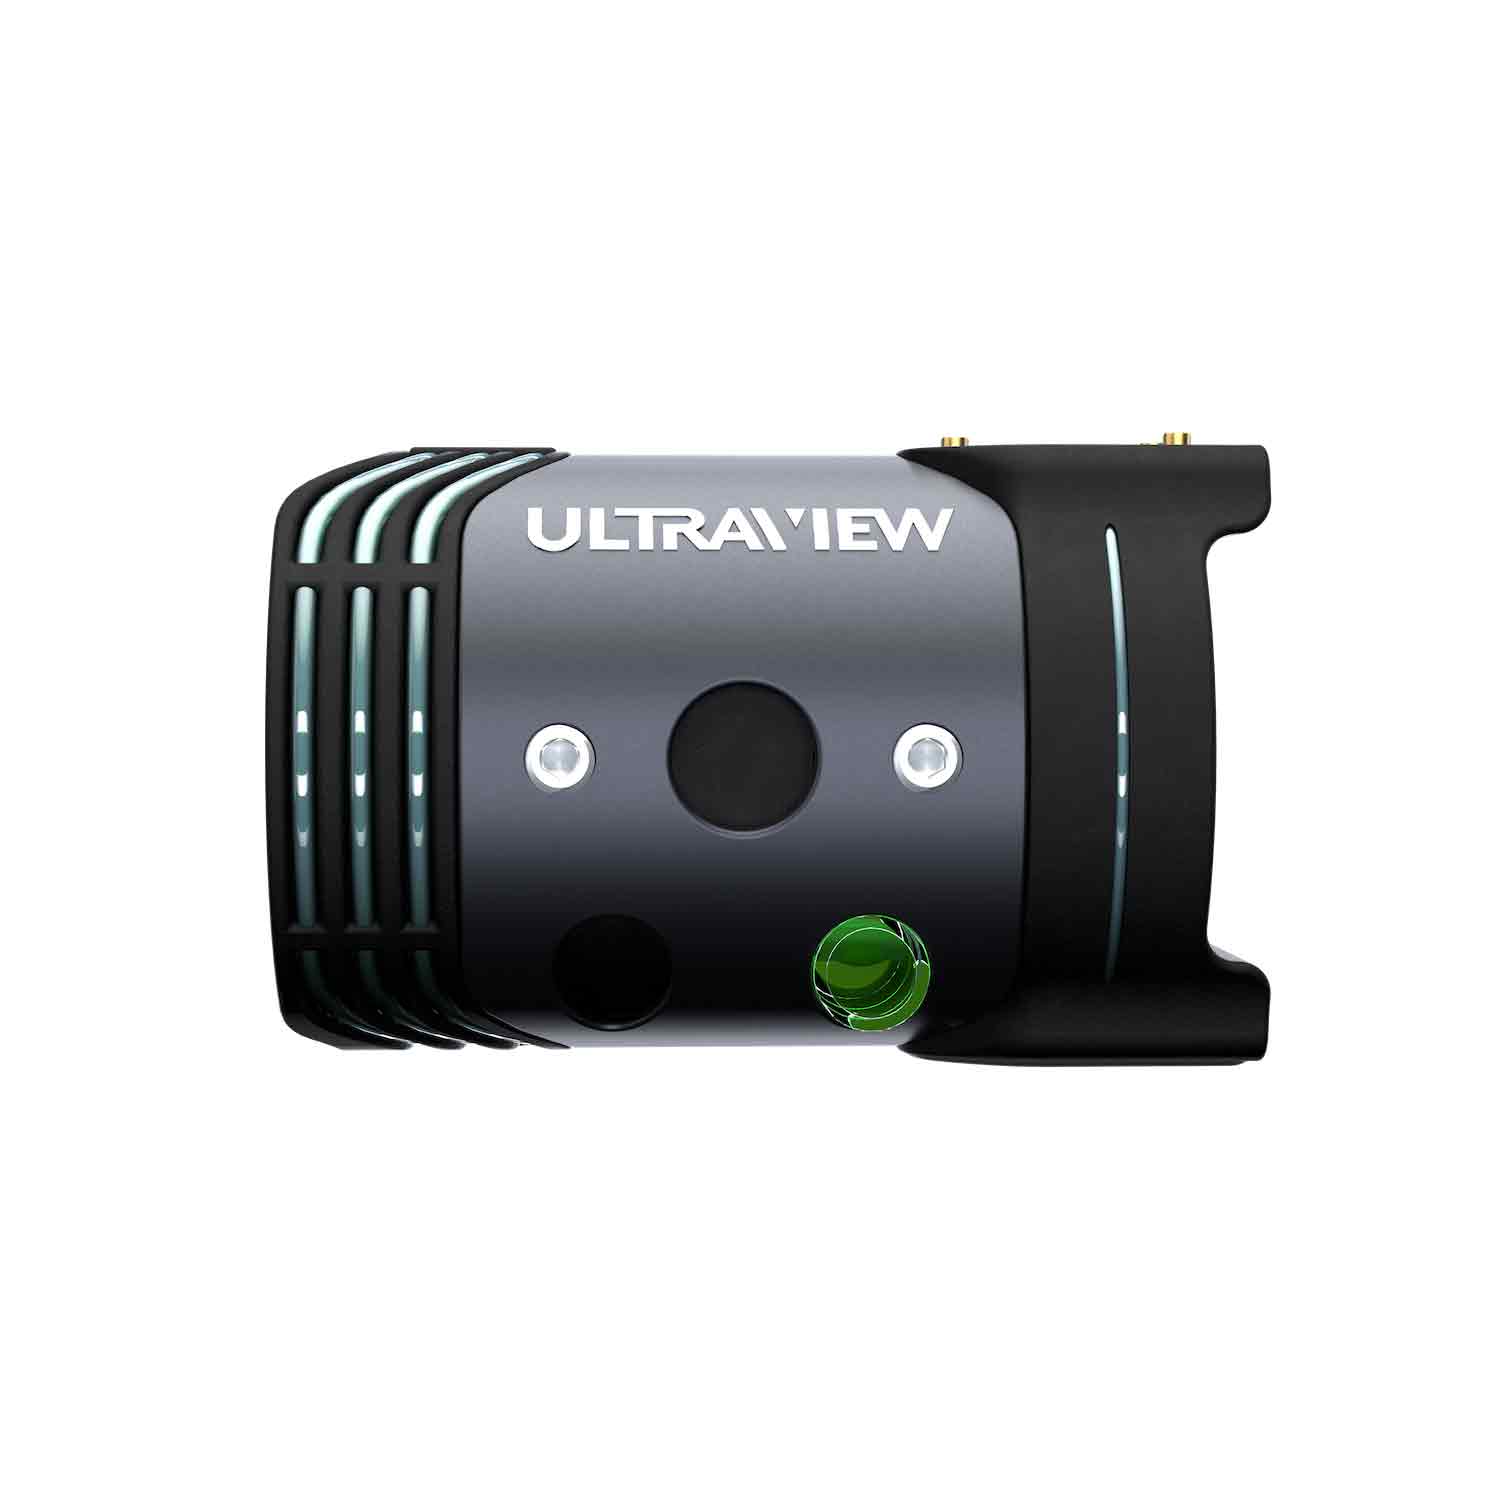 ULTRAVIEW UV3 Target Scope Kit with Lens